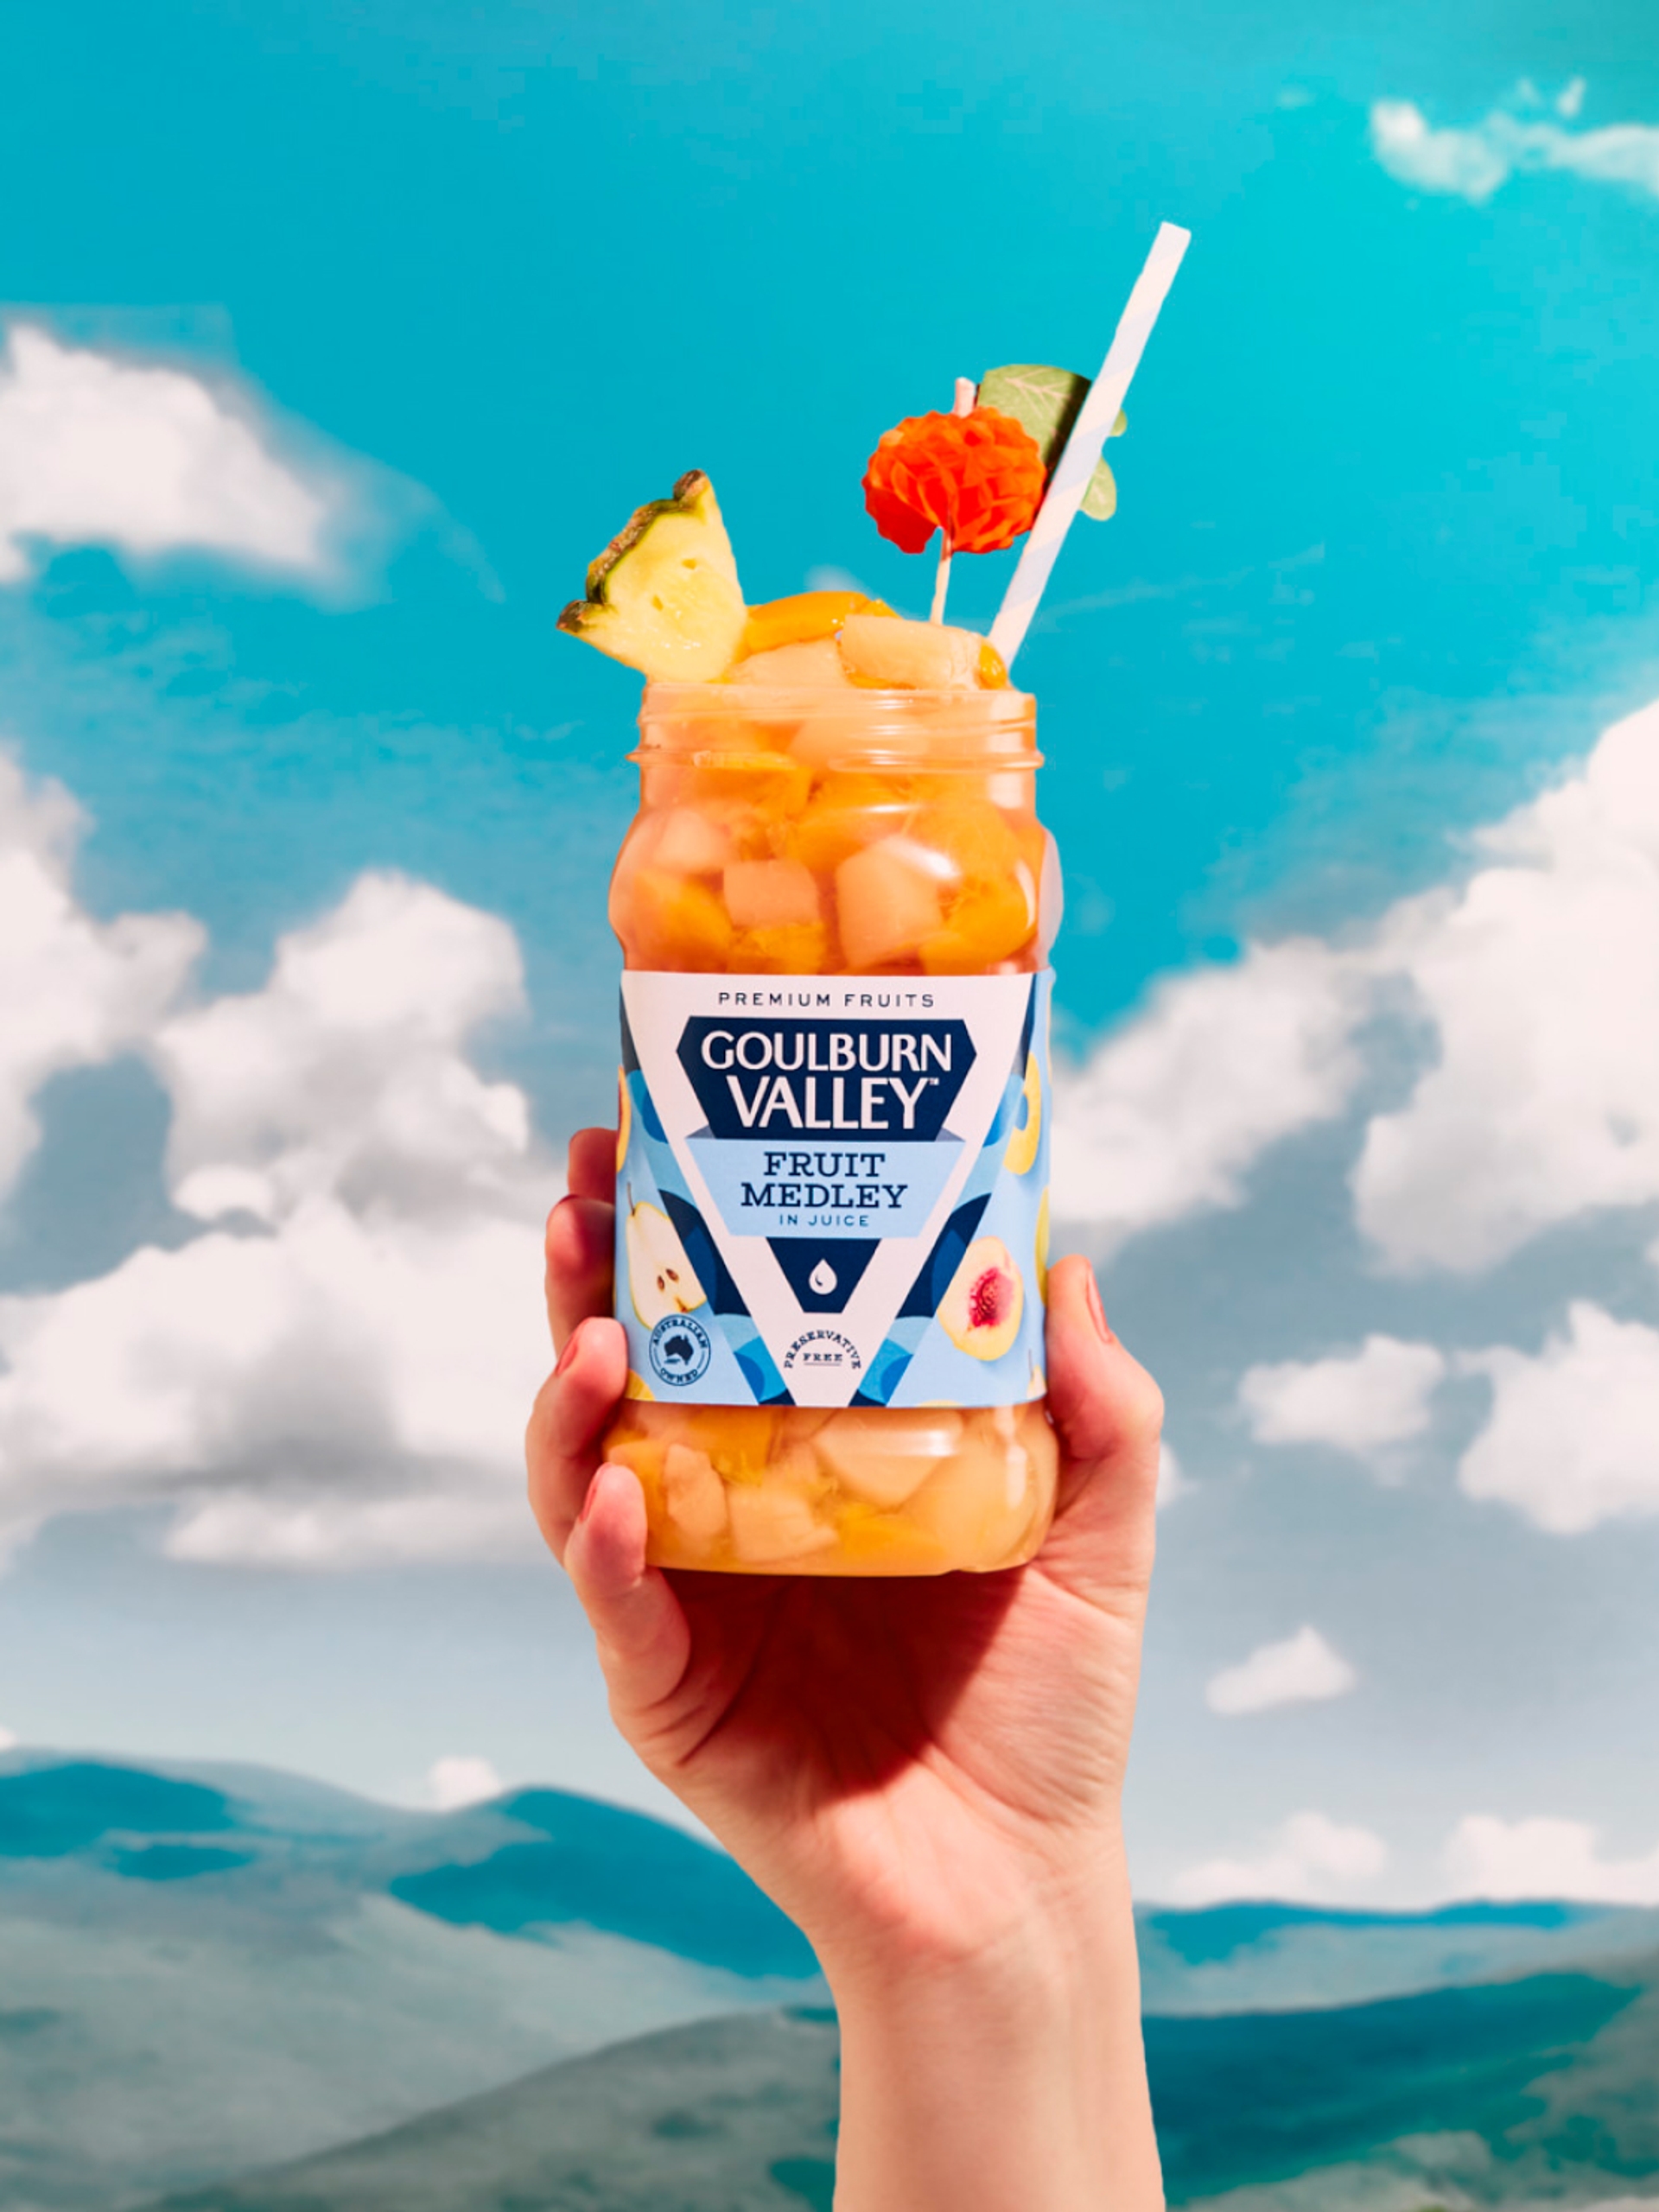 Hand holding up a jar of Goulburn Valley Fruit in front of landscape by packaging design agency by Our Revolution